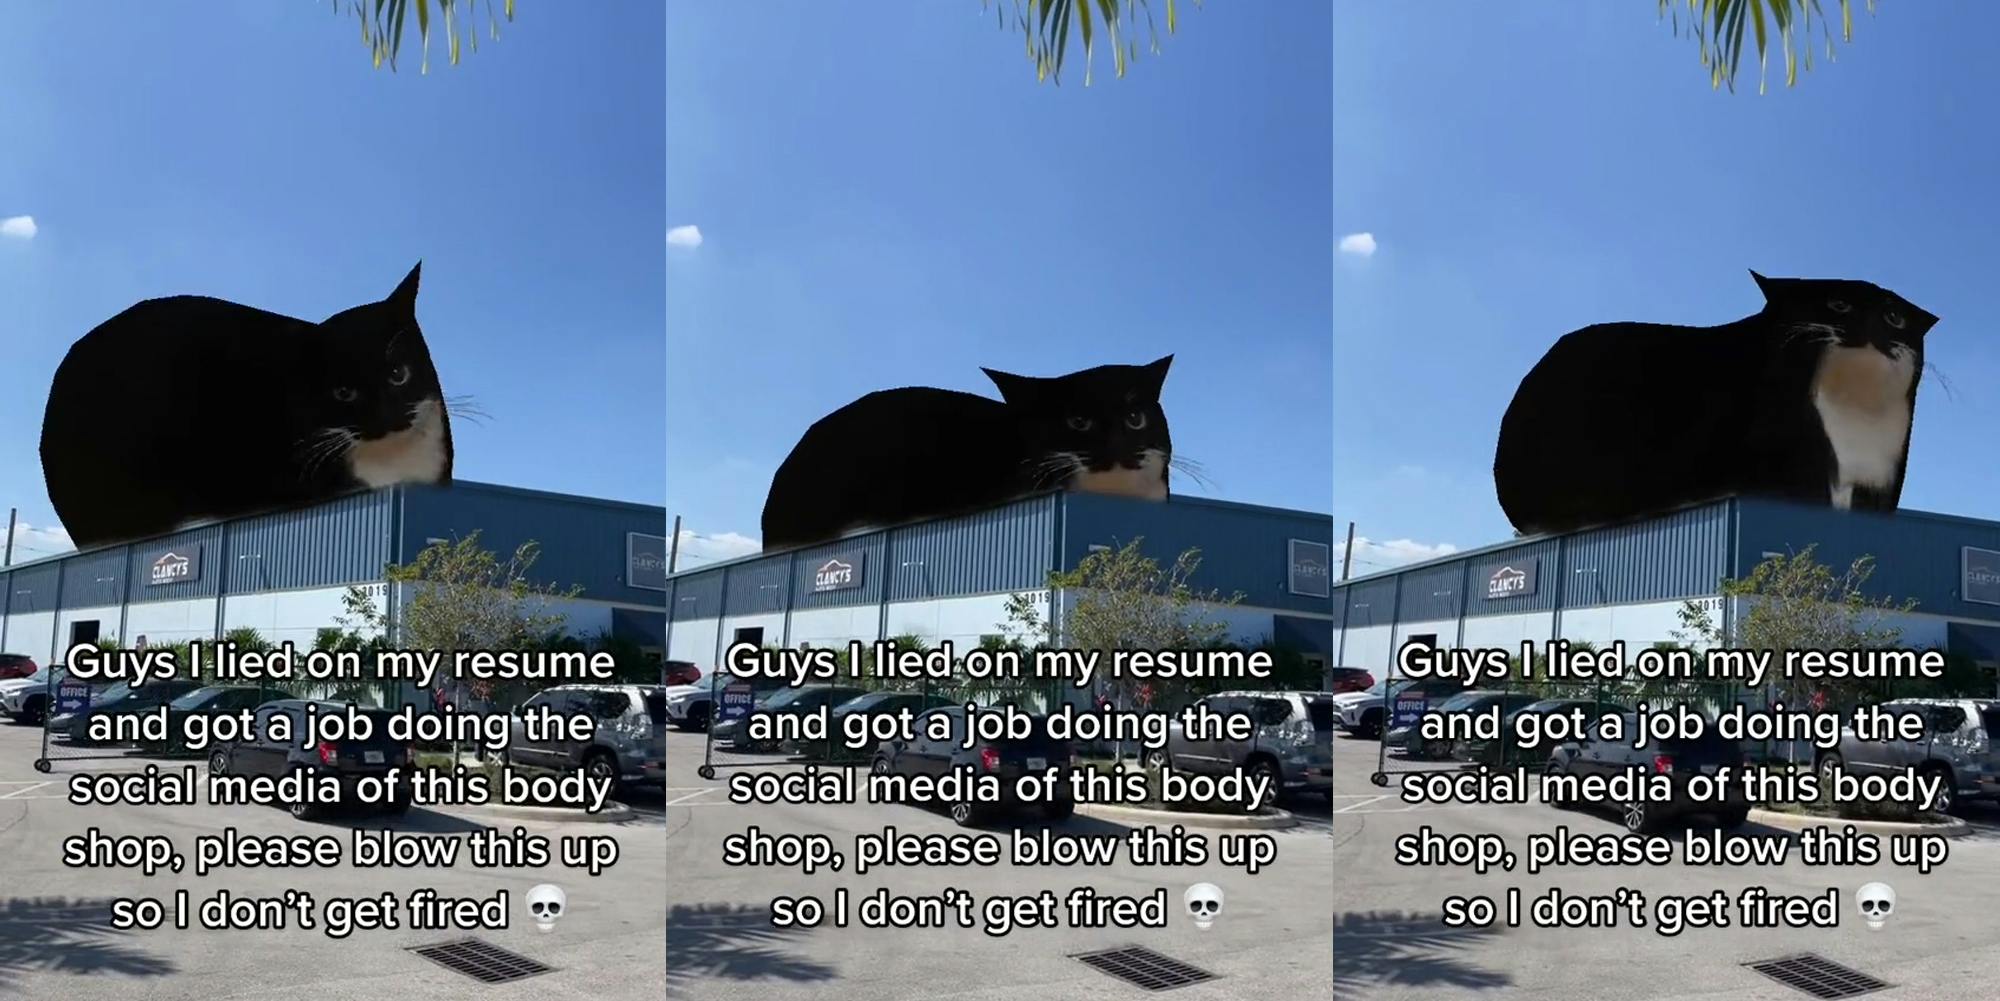 Clancy's Auto Body Shop with cat meme and caption "Guys I lied on my resume and got a job doing the social media of this body shop, please blow this up so I don't get fired" (l) Clancy's Auto Body Shop with cat meme and caption "Guys I lied on my resume and got a job doing the social media of this body shop, please blow this up so I don't get fired" (c) Clancy's Auto Body Shop with cat meme and caption "Guys I lied on my resume and got a job doing the social media of this body shop, please blow this up so I don't get fired" (r)